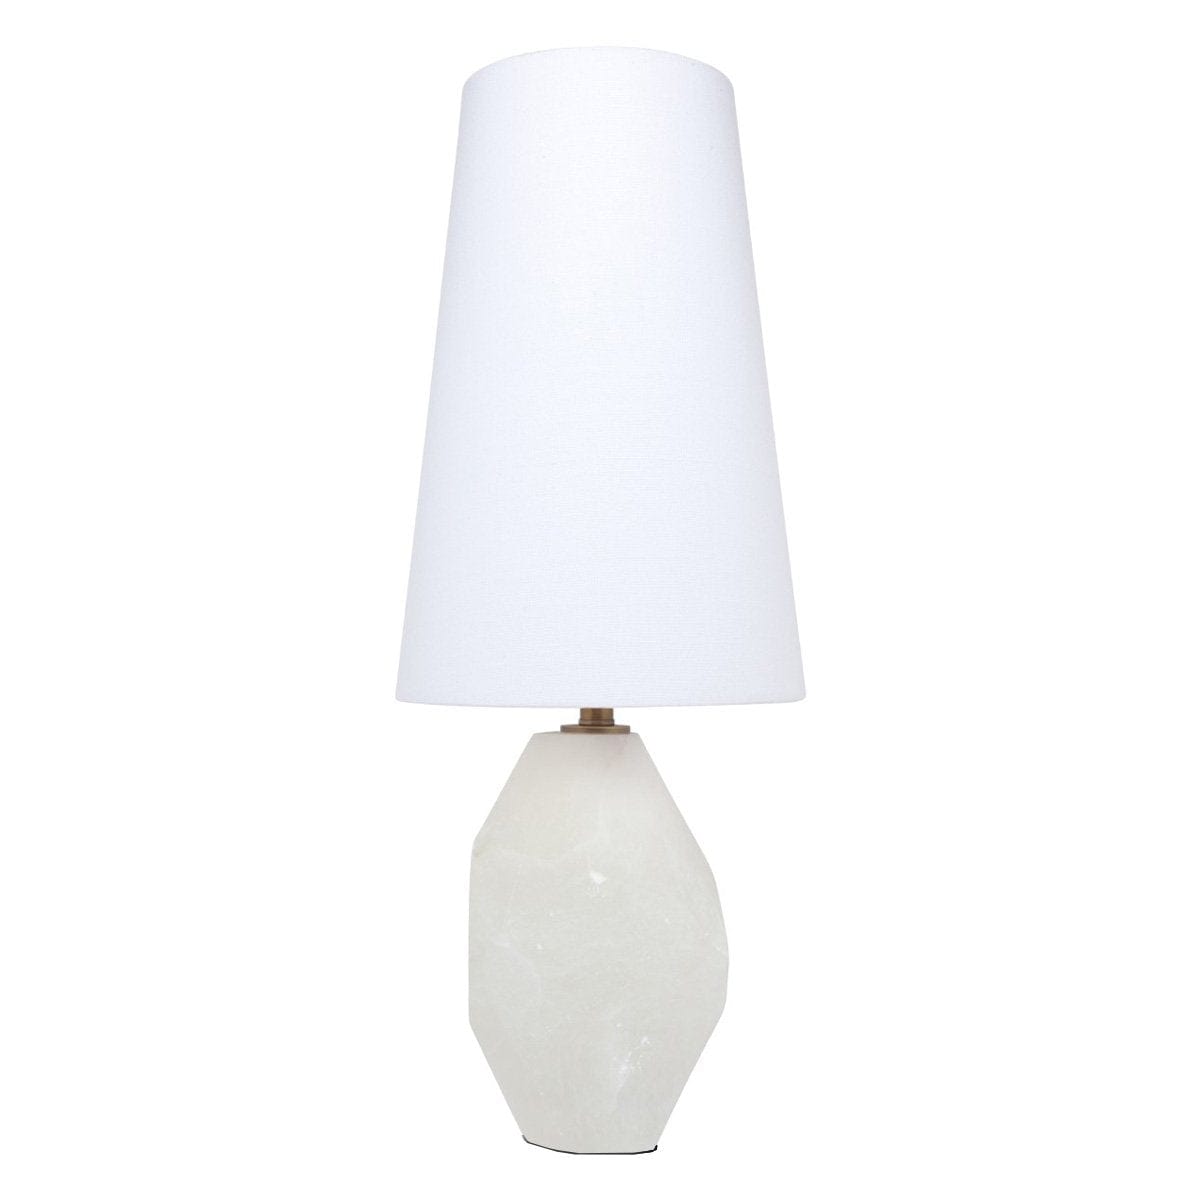 CAFE LIGHTING & LIVING Table Lamp Budapest Alabaster Table Lamp B12196